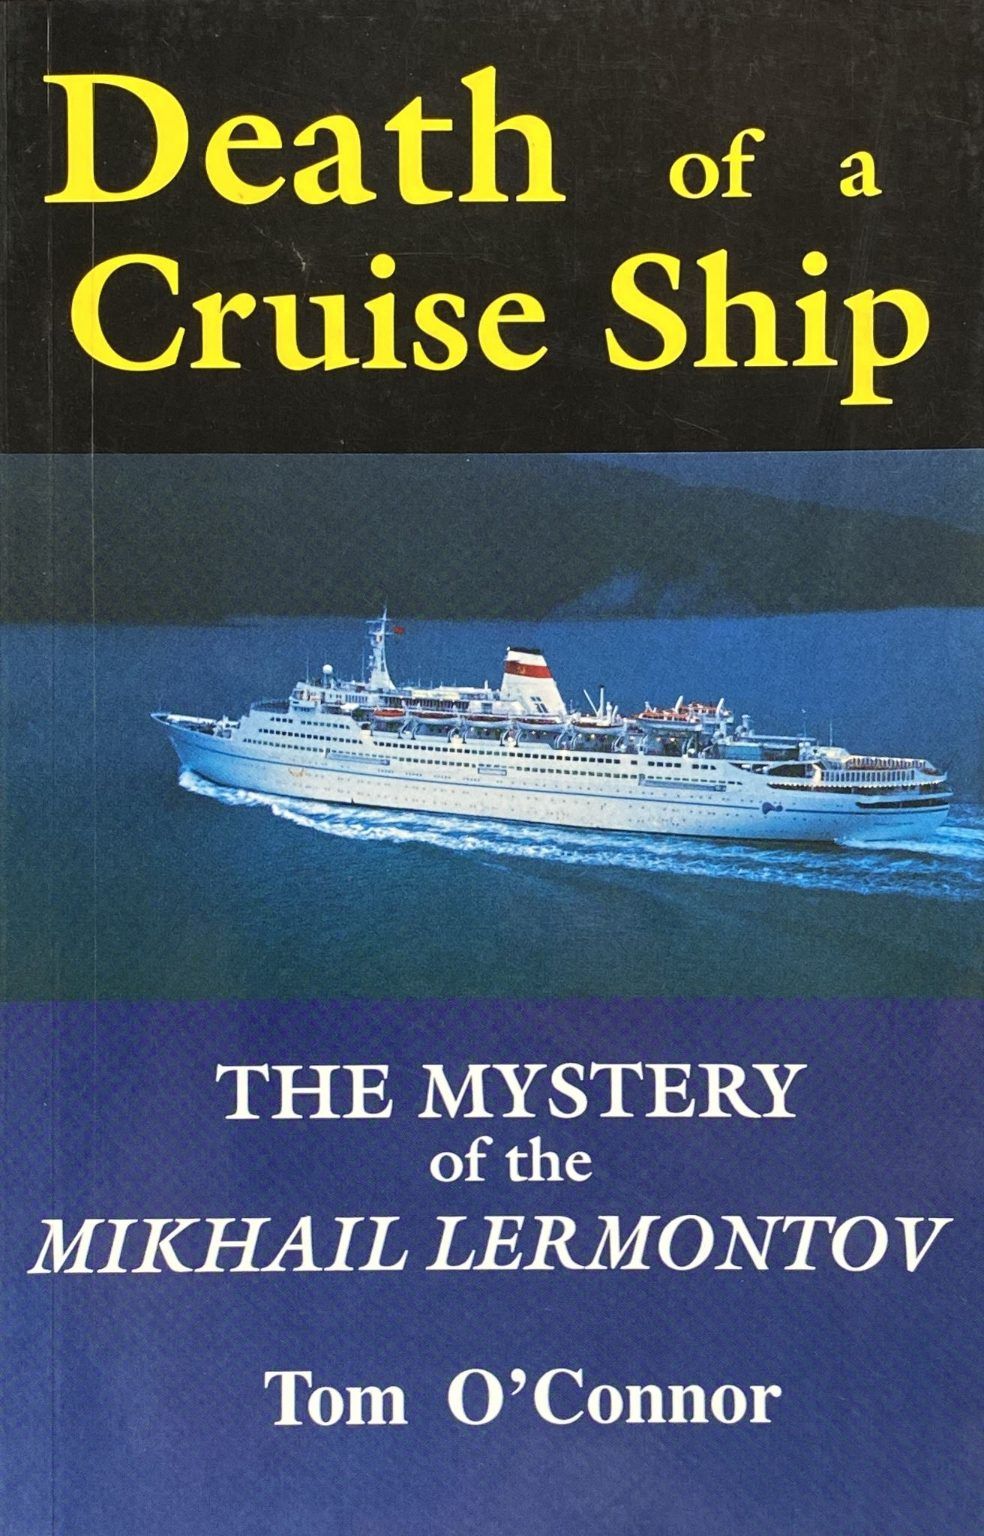 DEATH OF A CRUISE SHIP: The Mystery of the Mikhail Lermontov